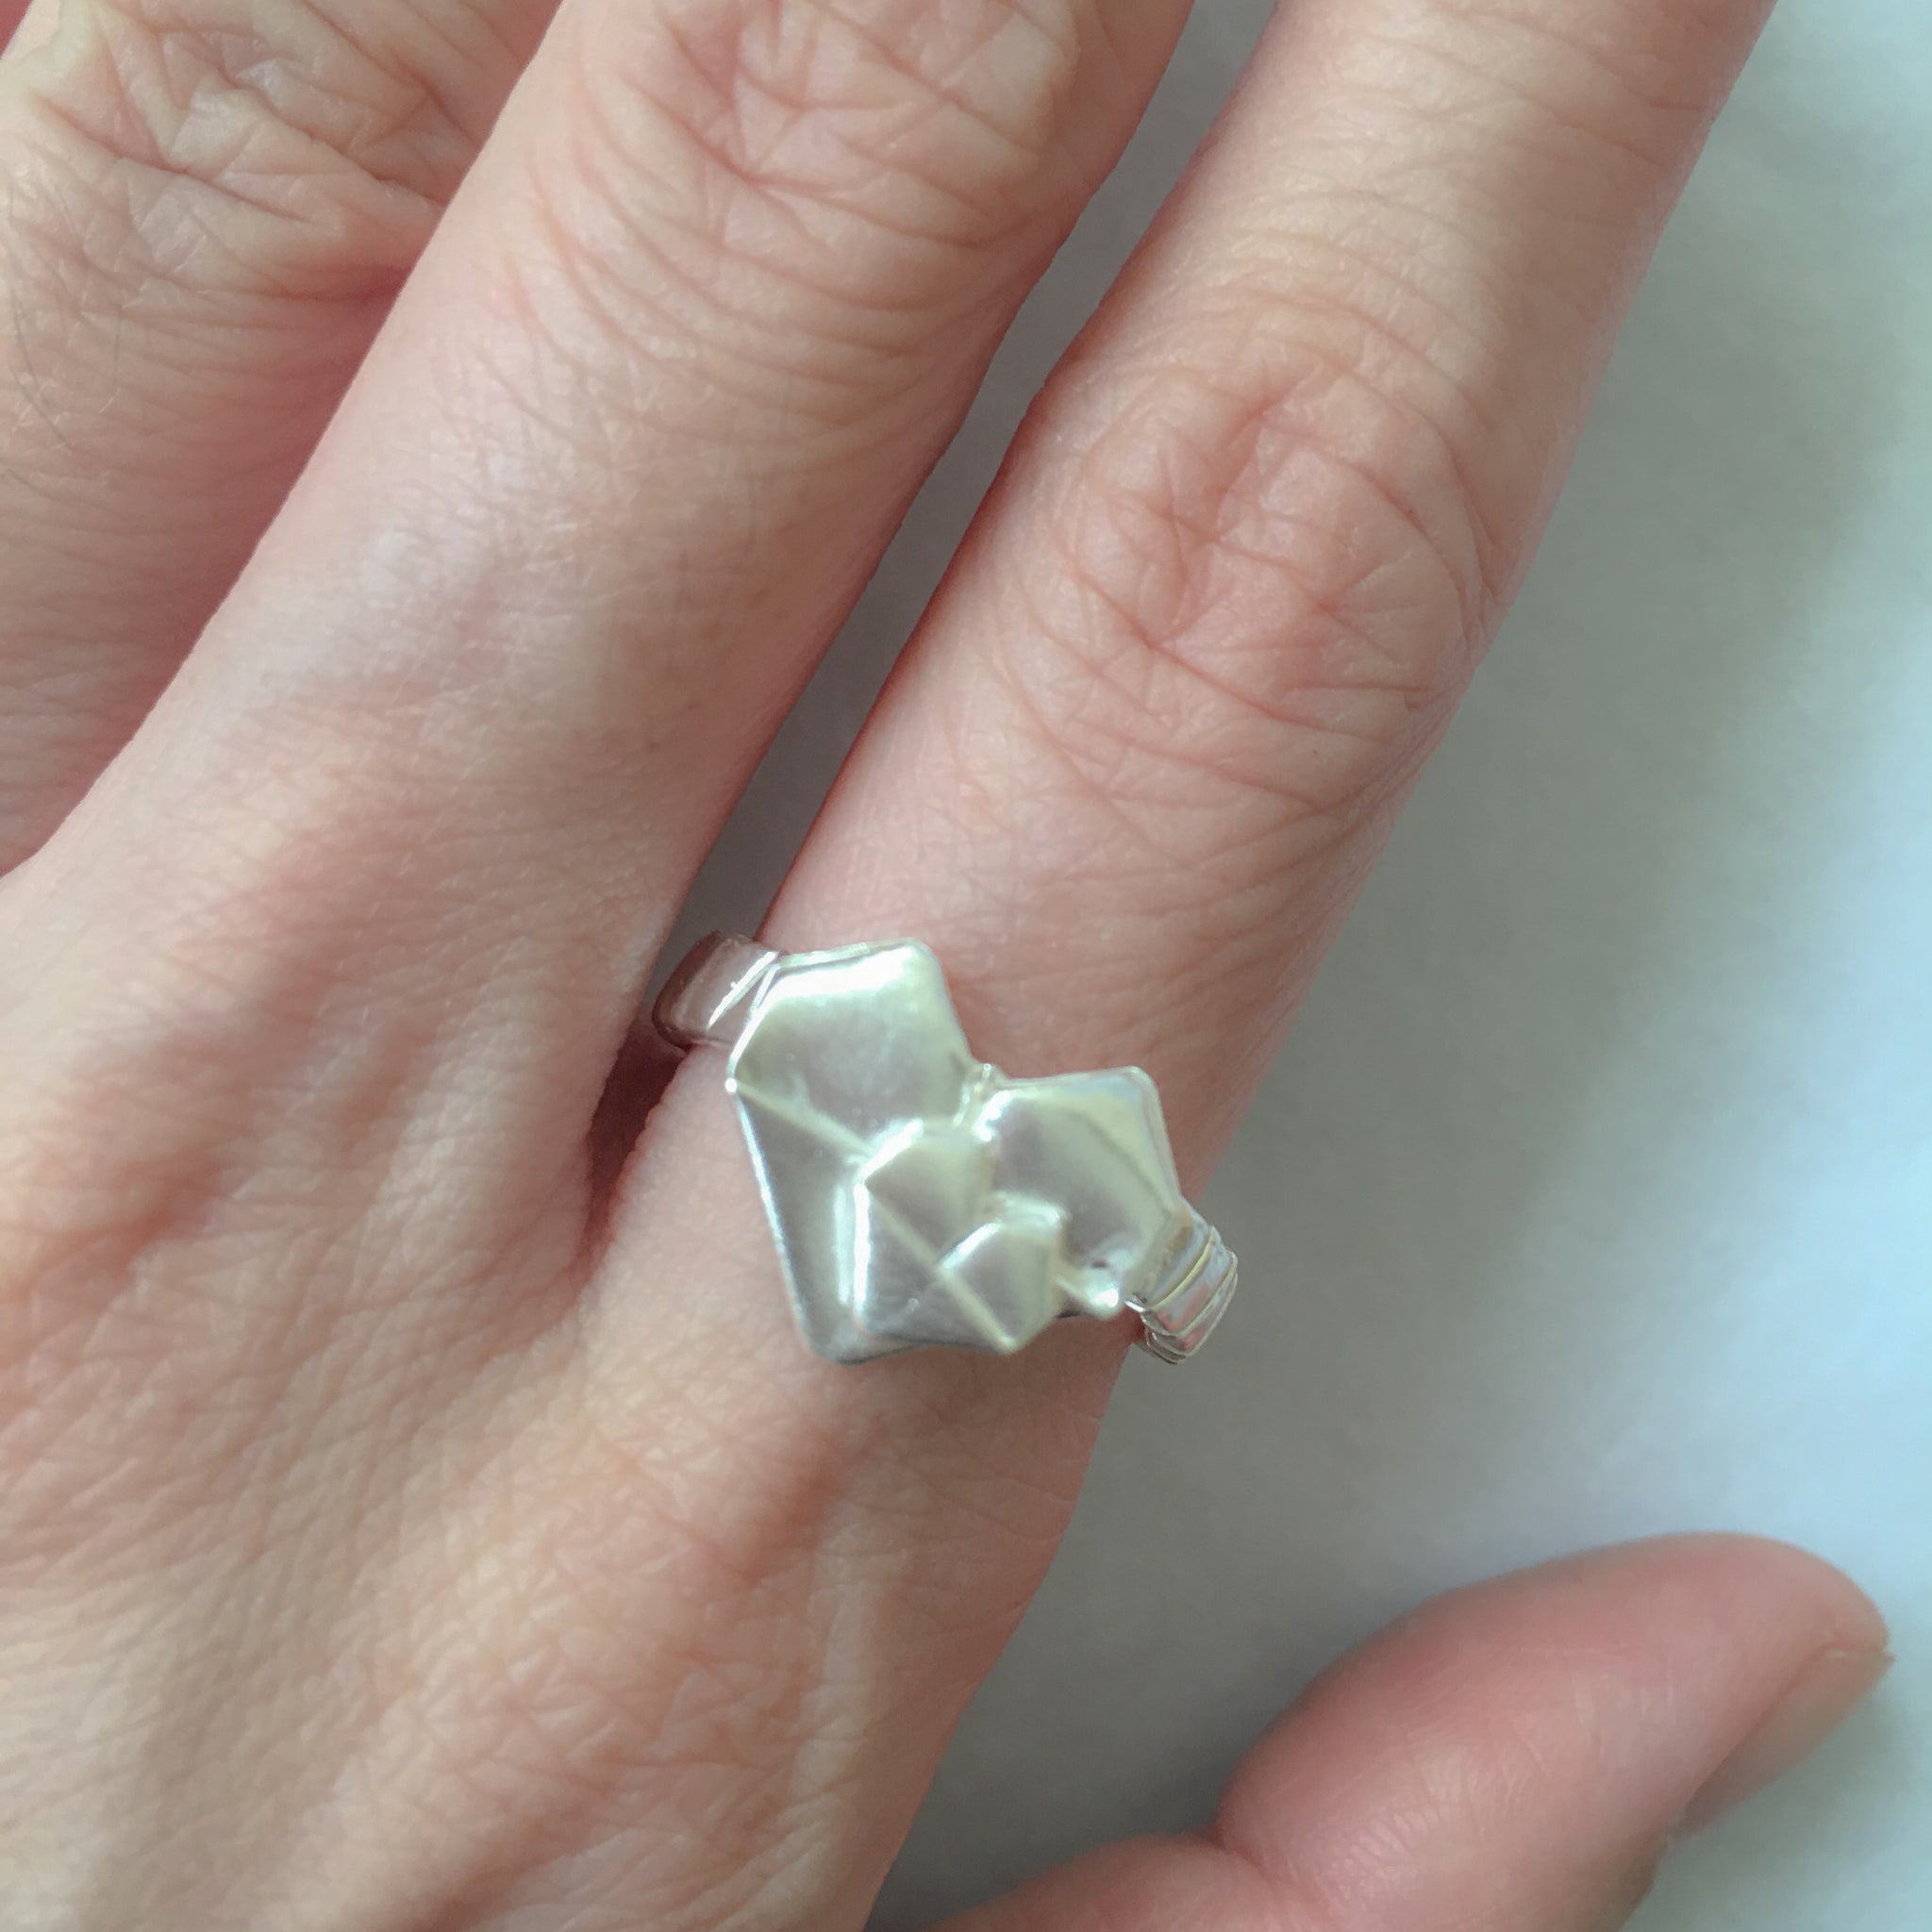 Ring C 925 Silver Origami Big and Small Heart Ring Size 13